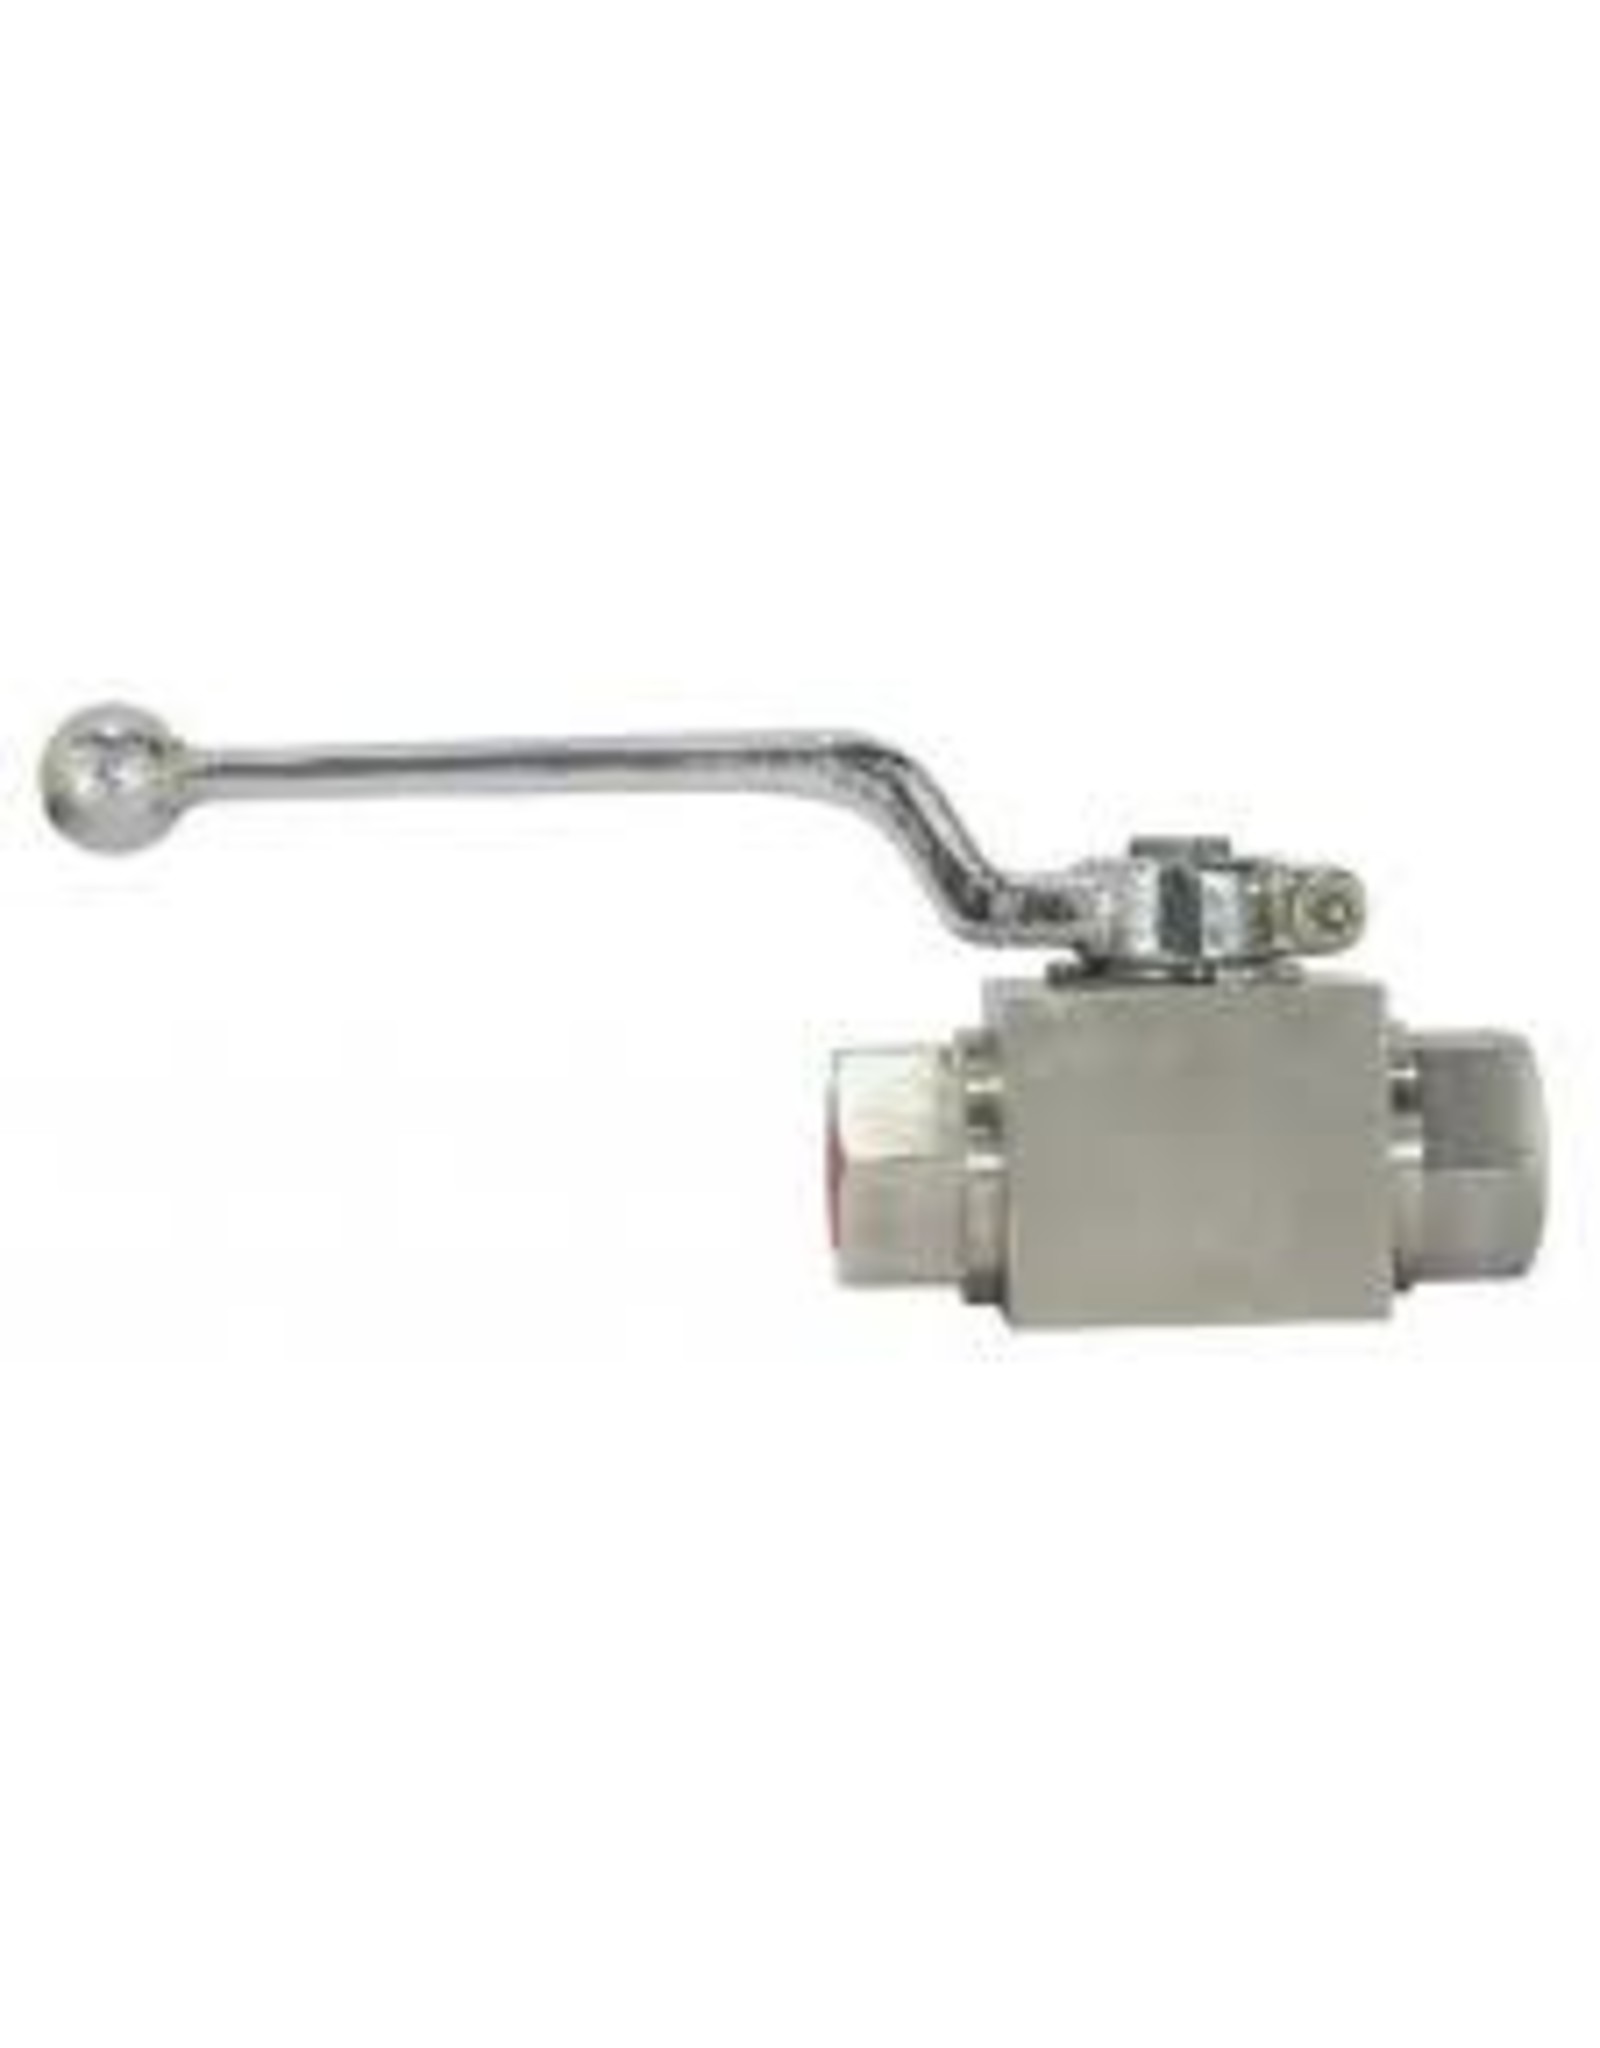 BE 85.300.046S Stainless Ball Valve 7200psi